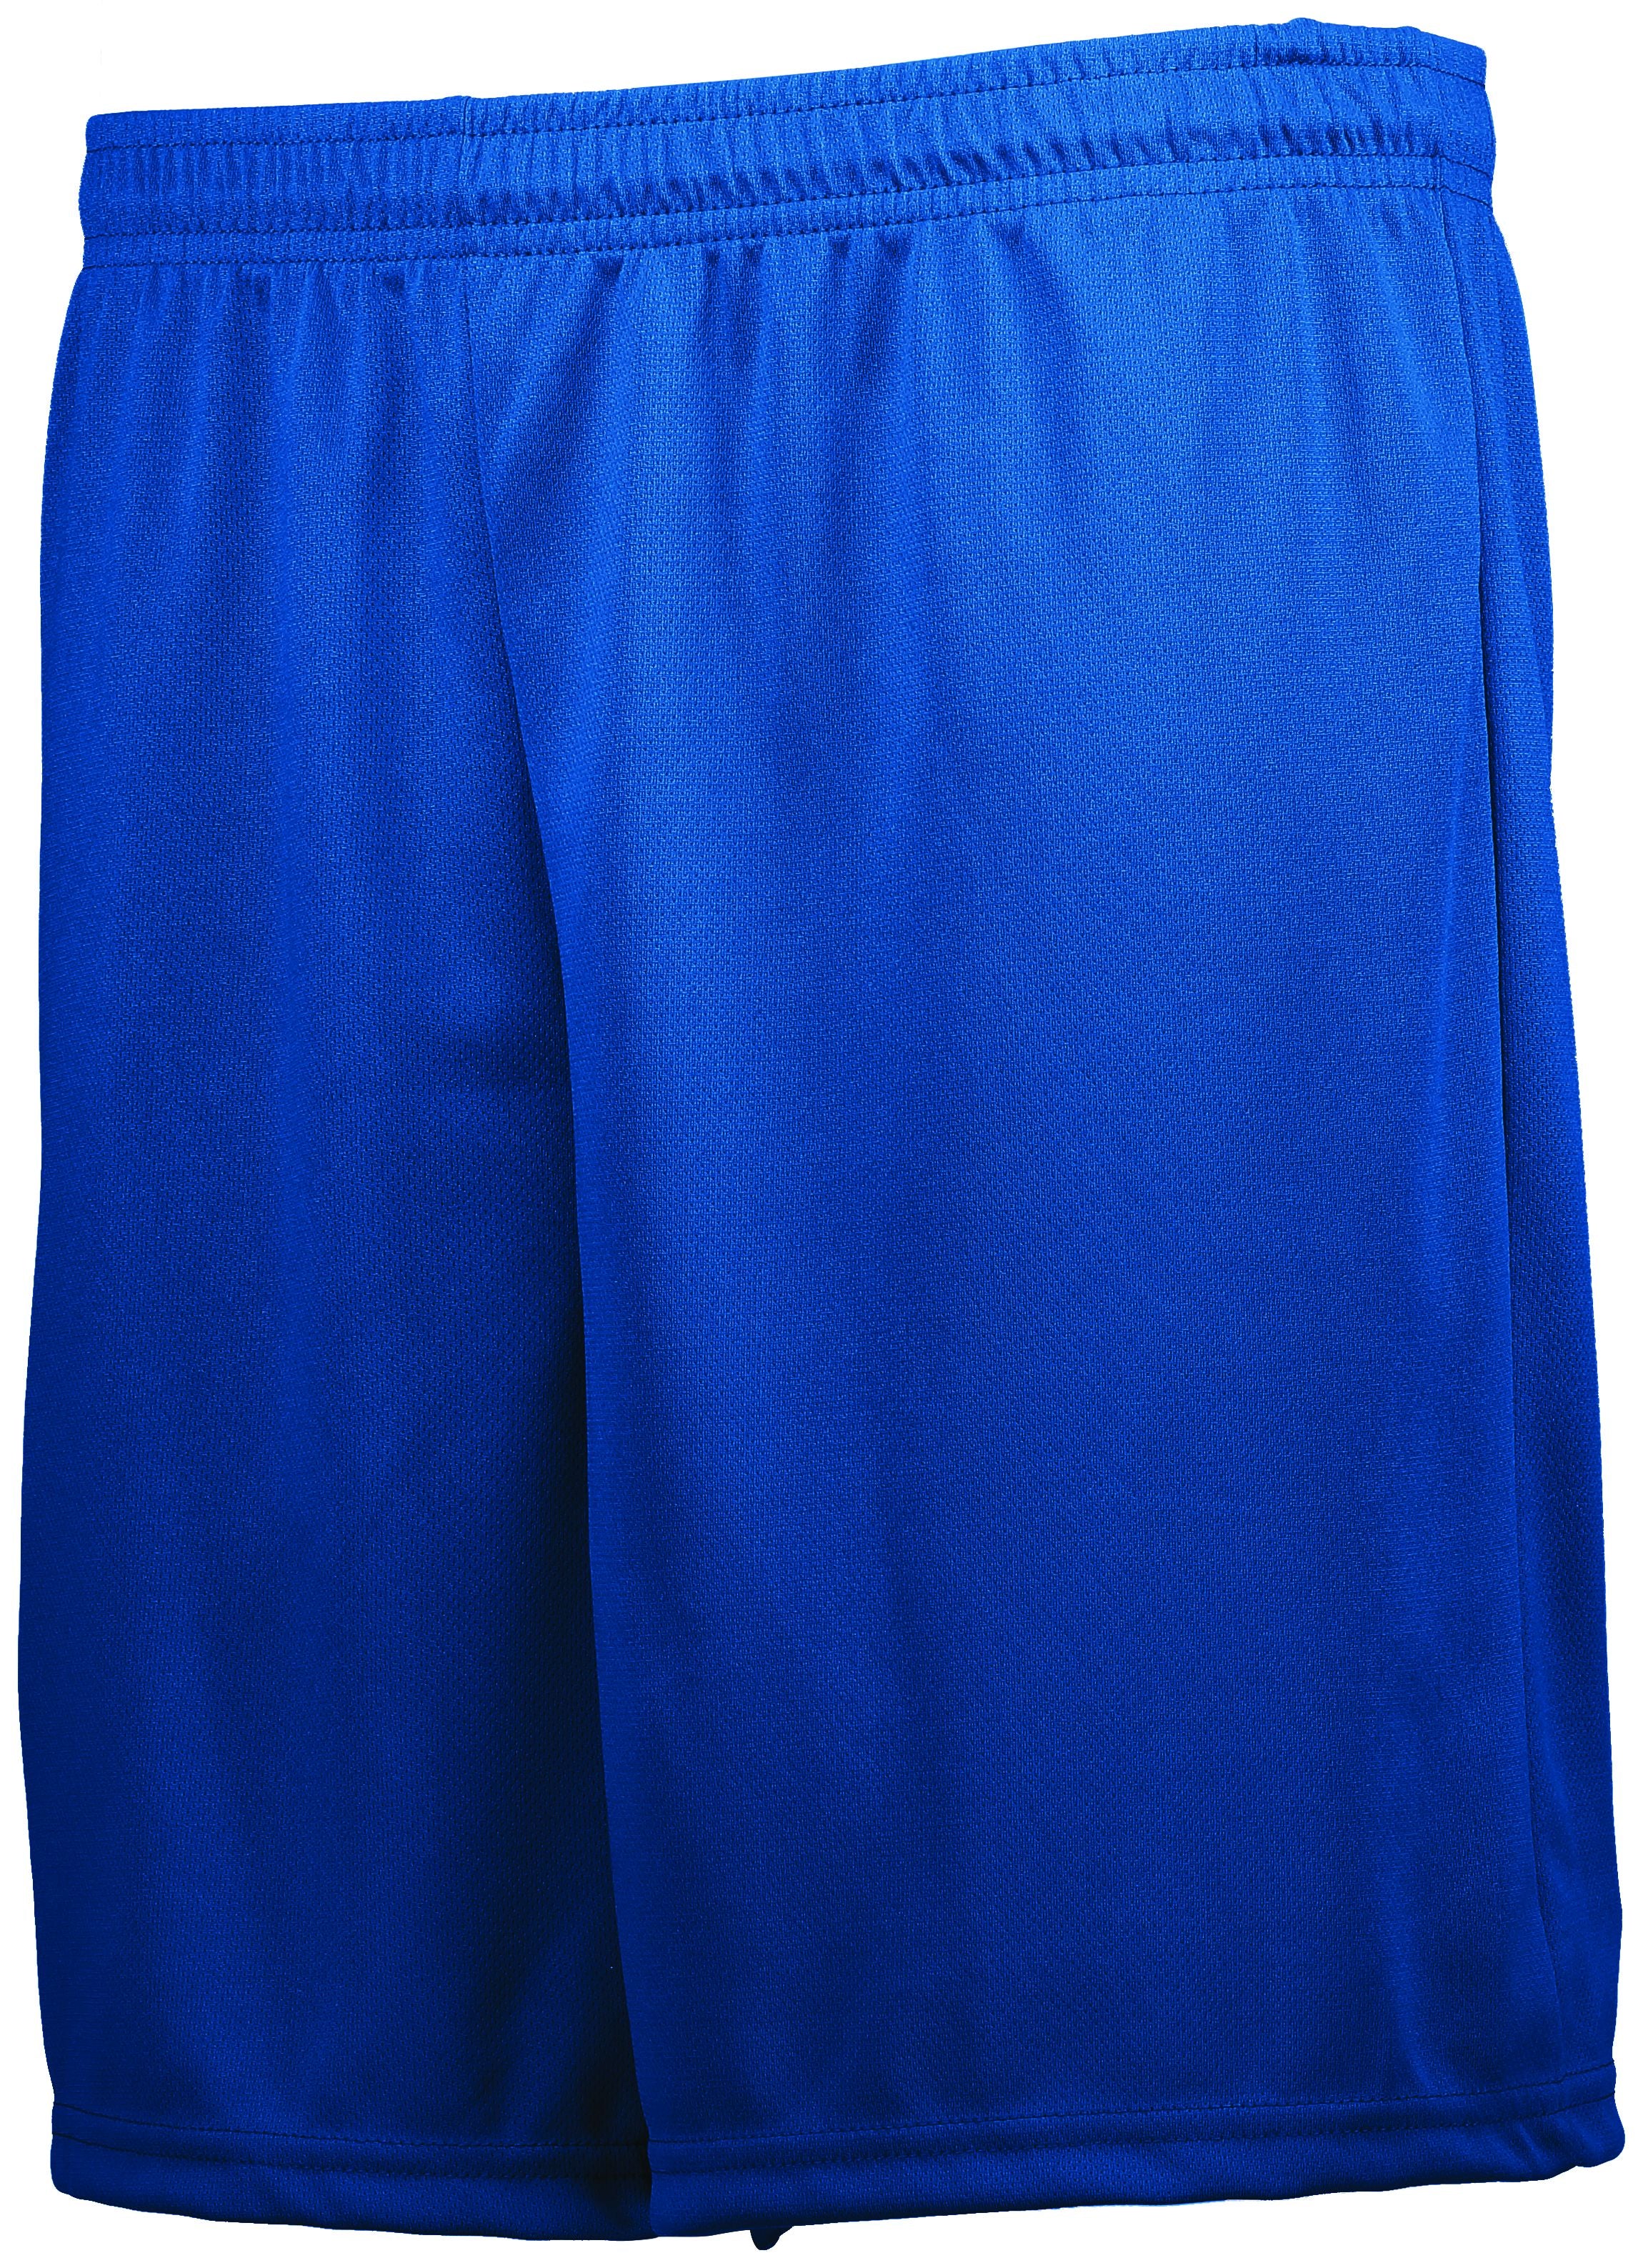 High 5 Youth Prevail Shorts in Royal  -Part of the Youth, Youth-Shorts, High5-Products, Soccer, All-Sports-1 product lines at KanaleyCreations.com